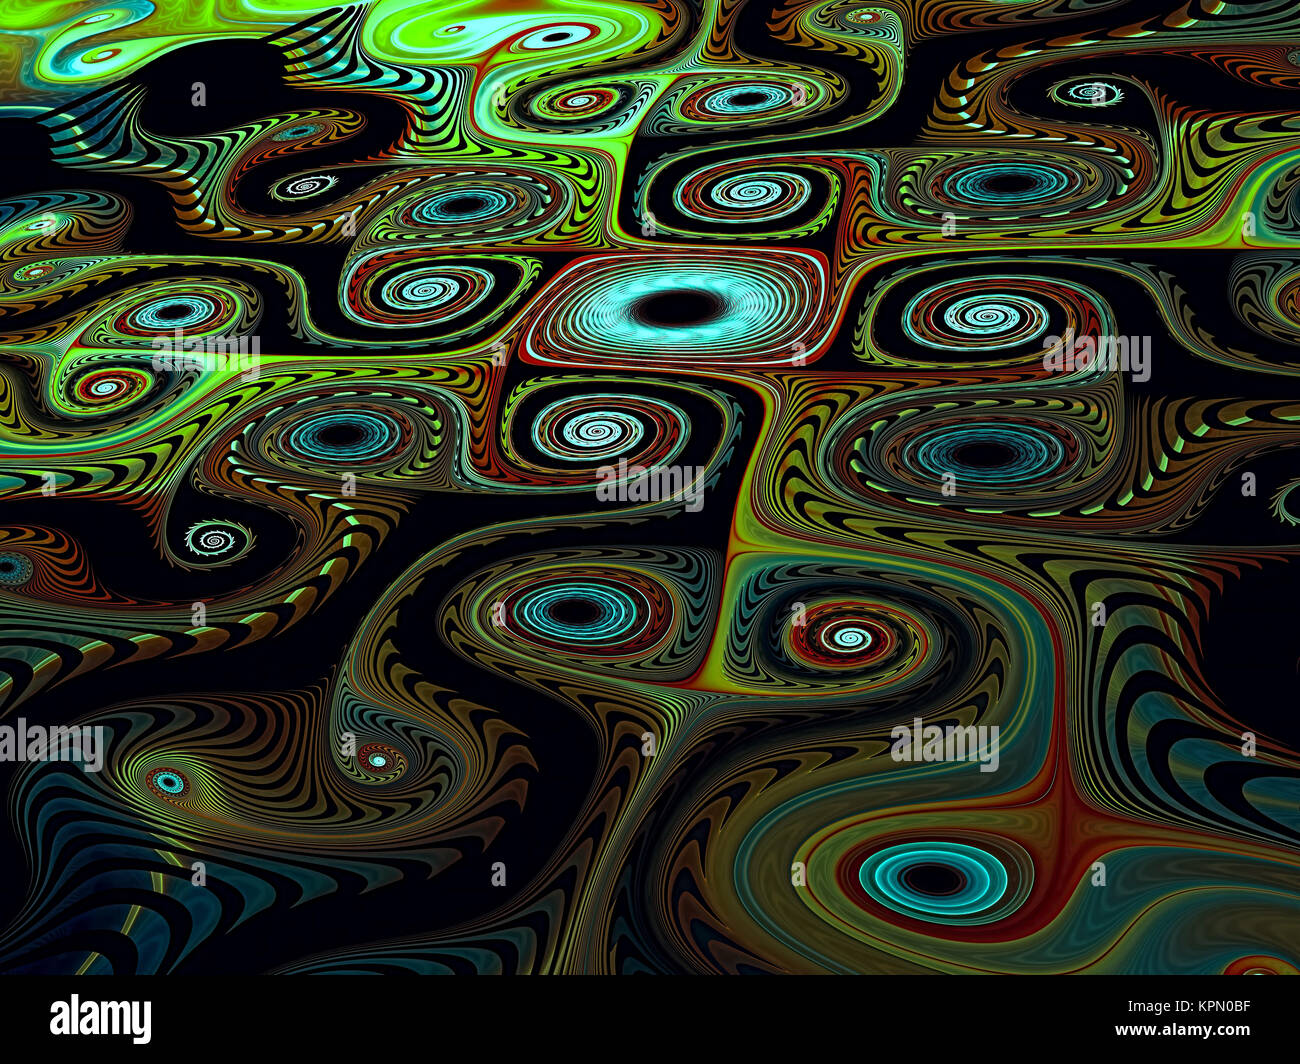 Abstract ornament background digitally generated image Stock Photo